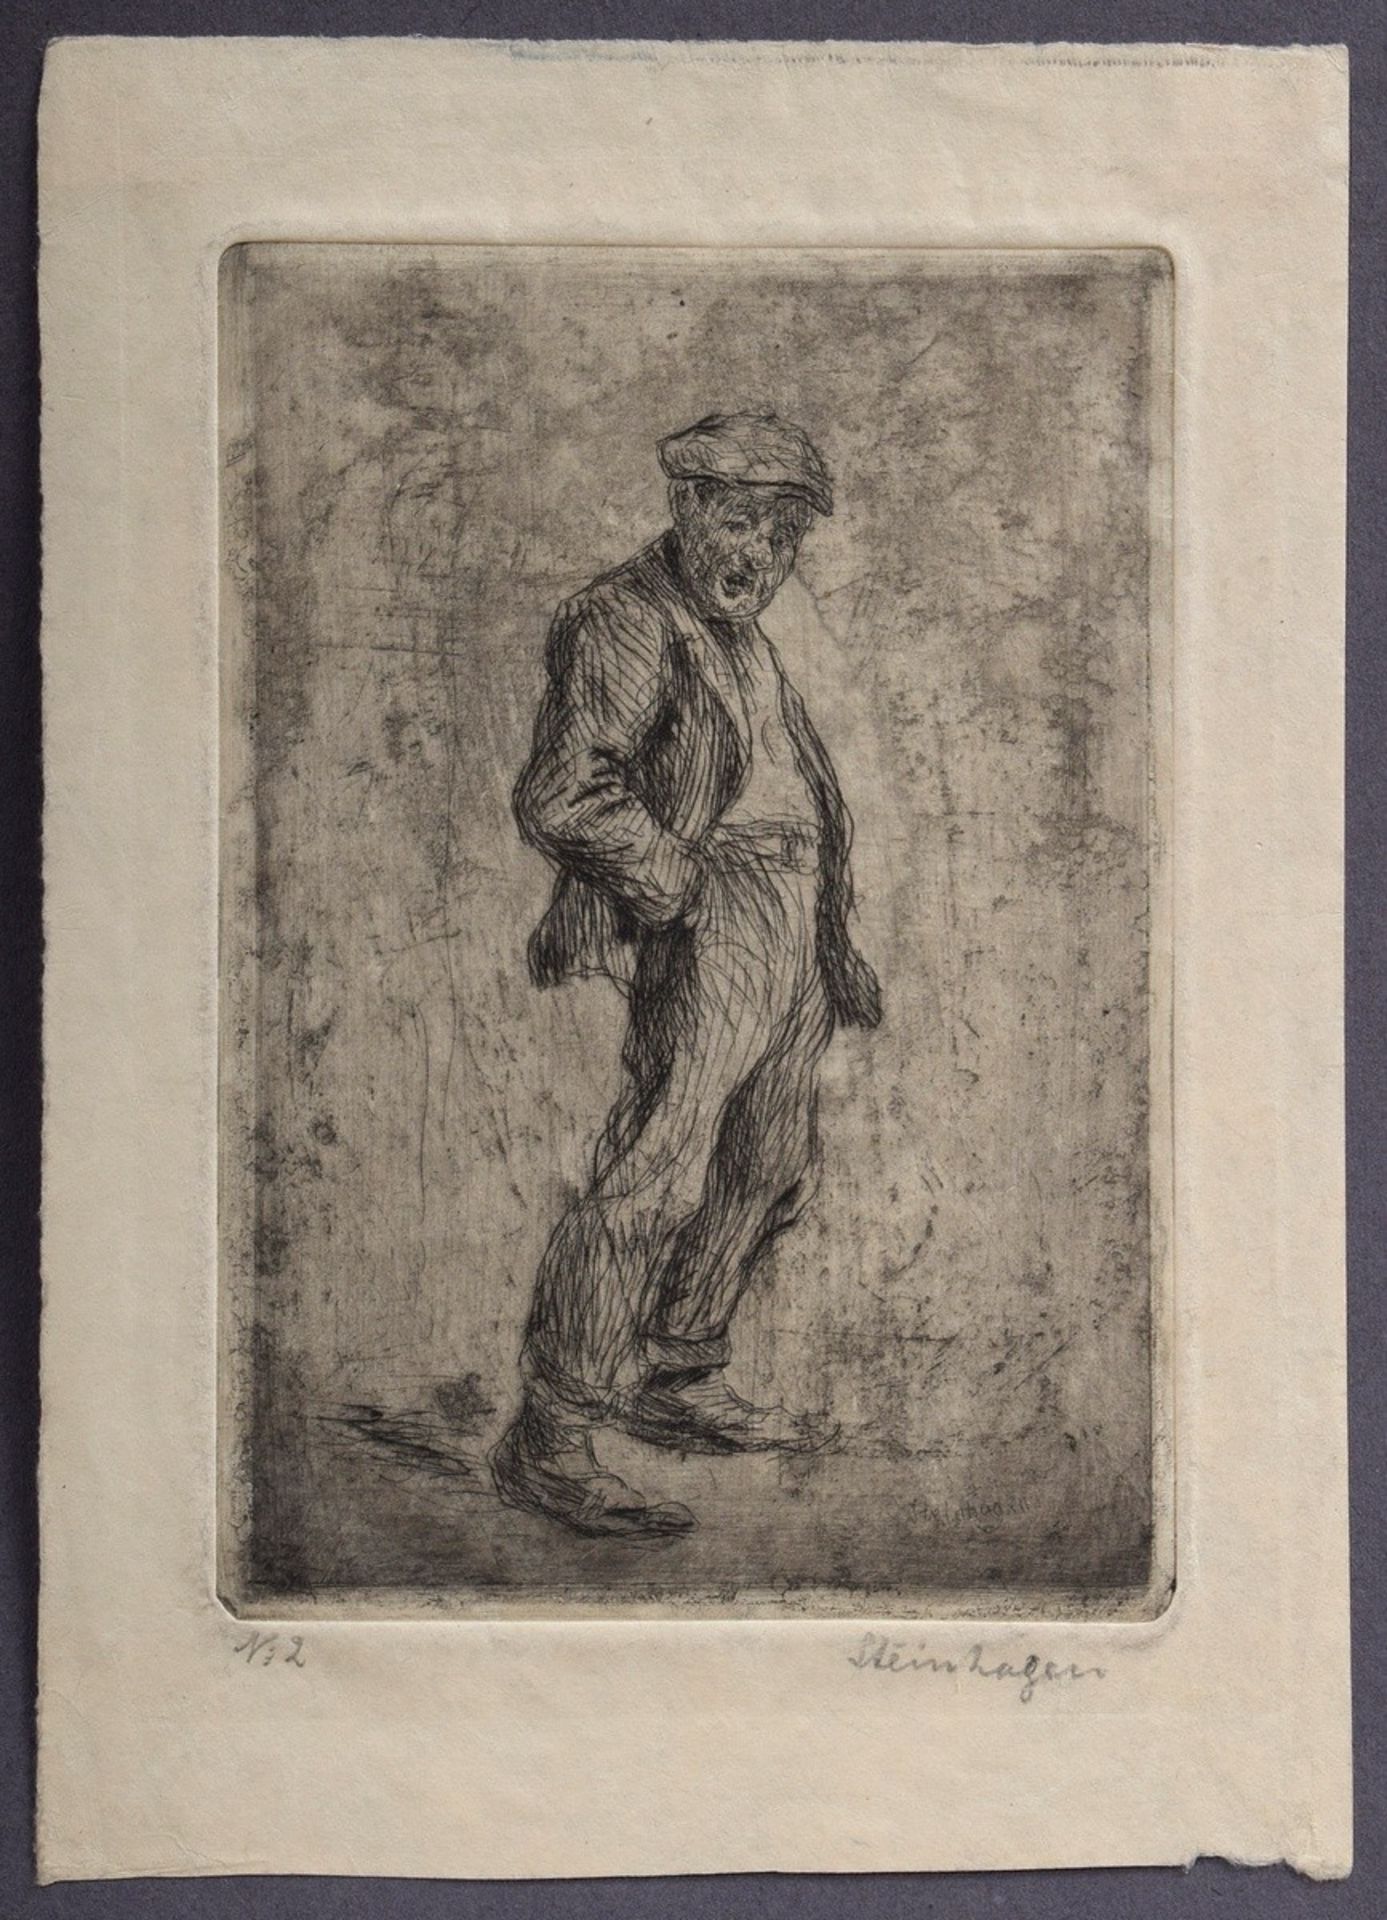 3 Steinhagen, Heinrich (1880-1948) "Hamburg" and "Types", etchings, some signed and titled on the p - Image 5 of 6